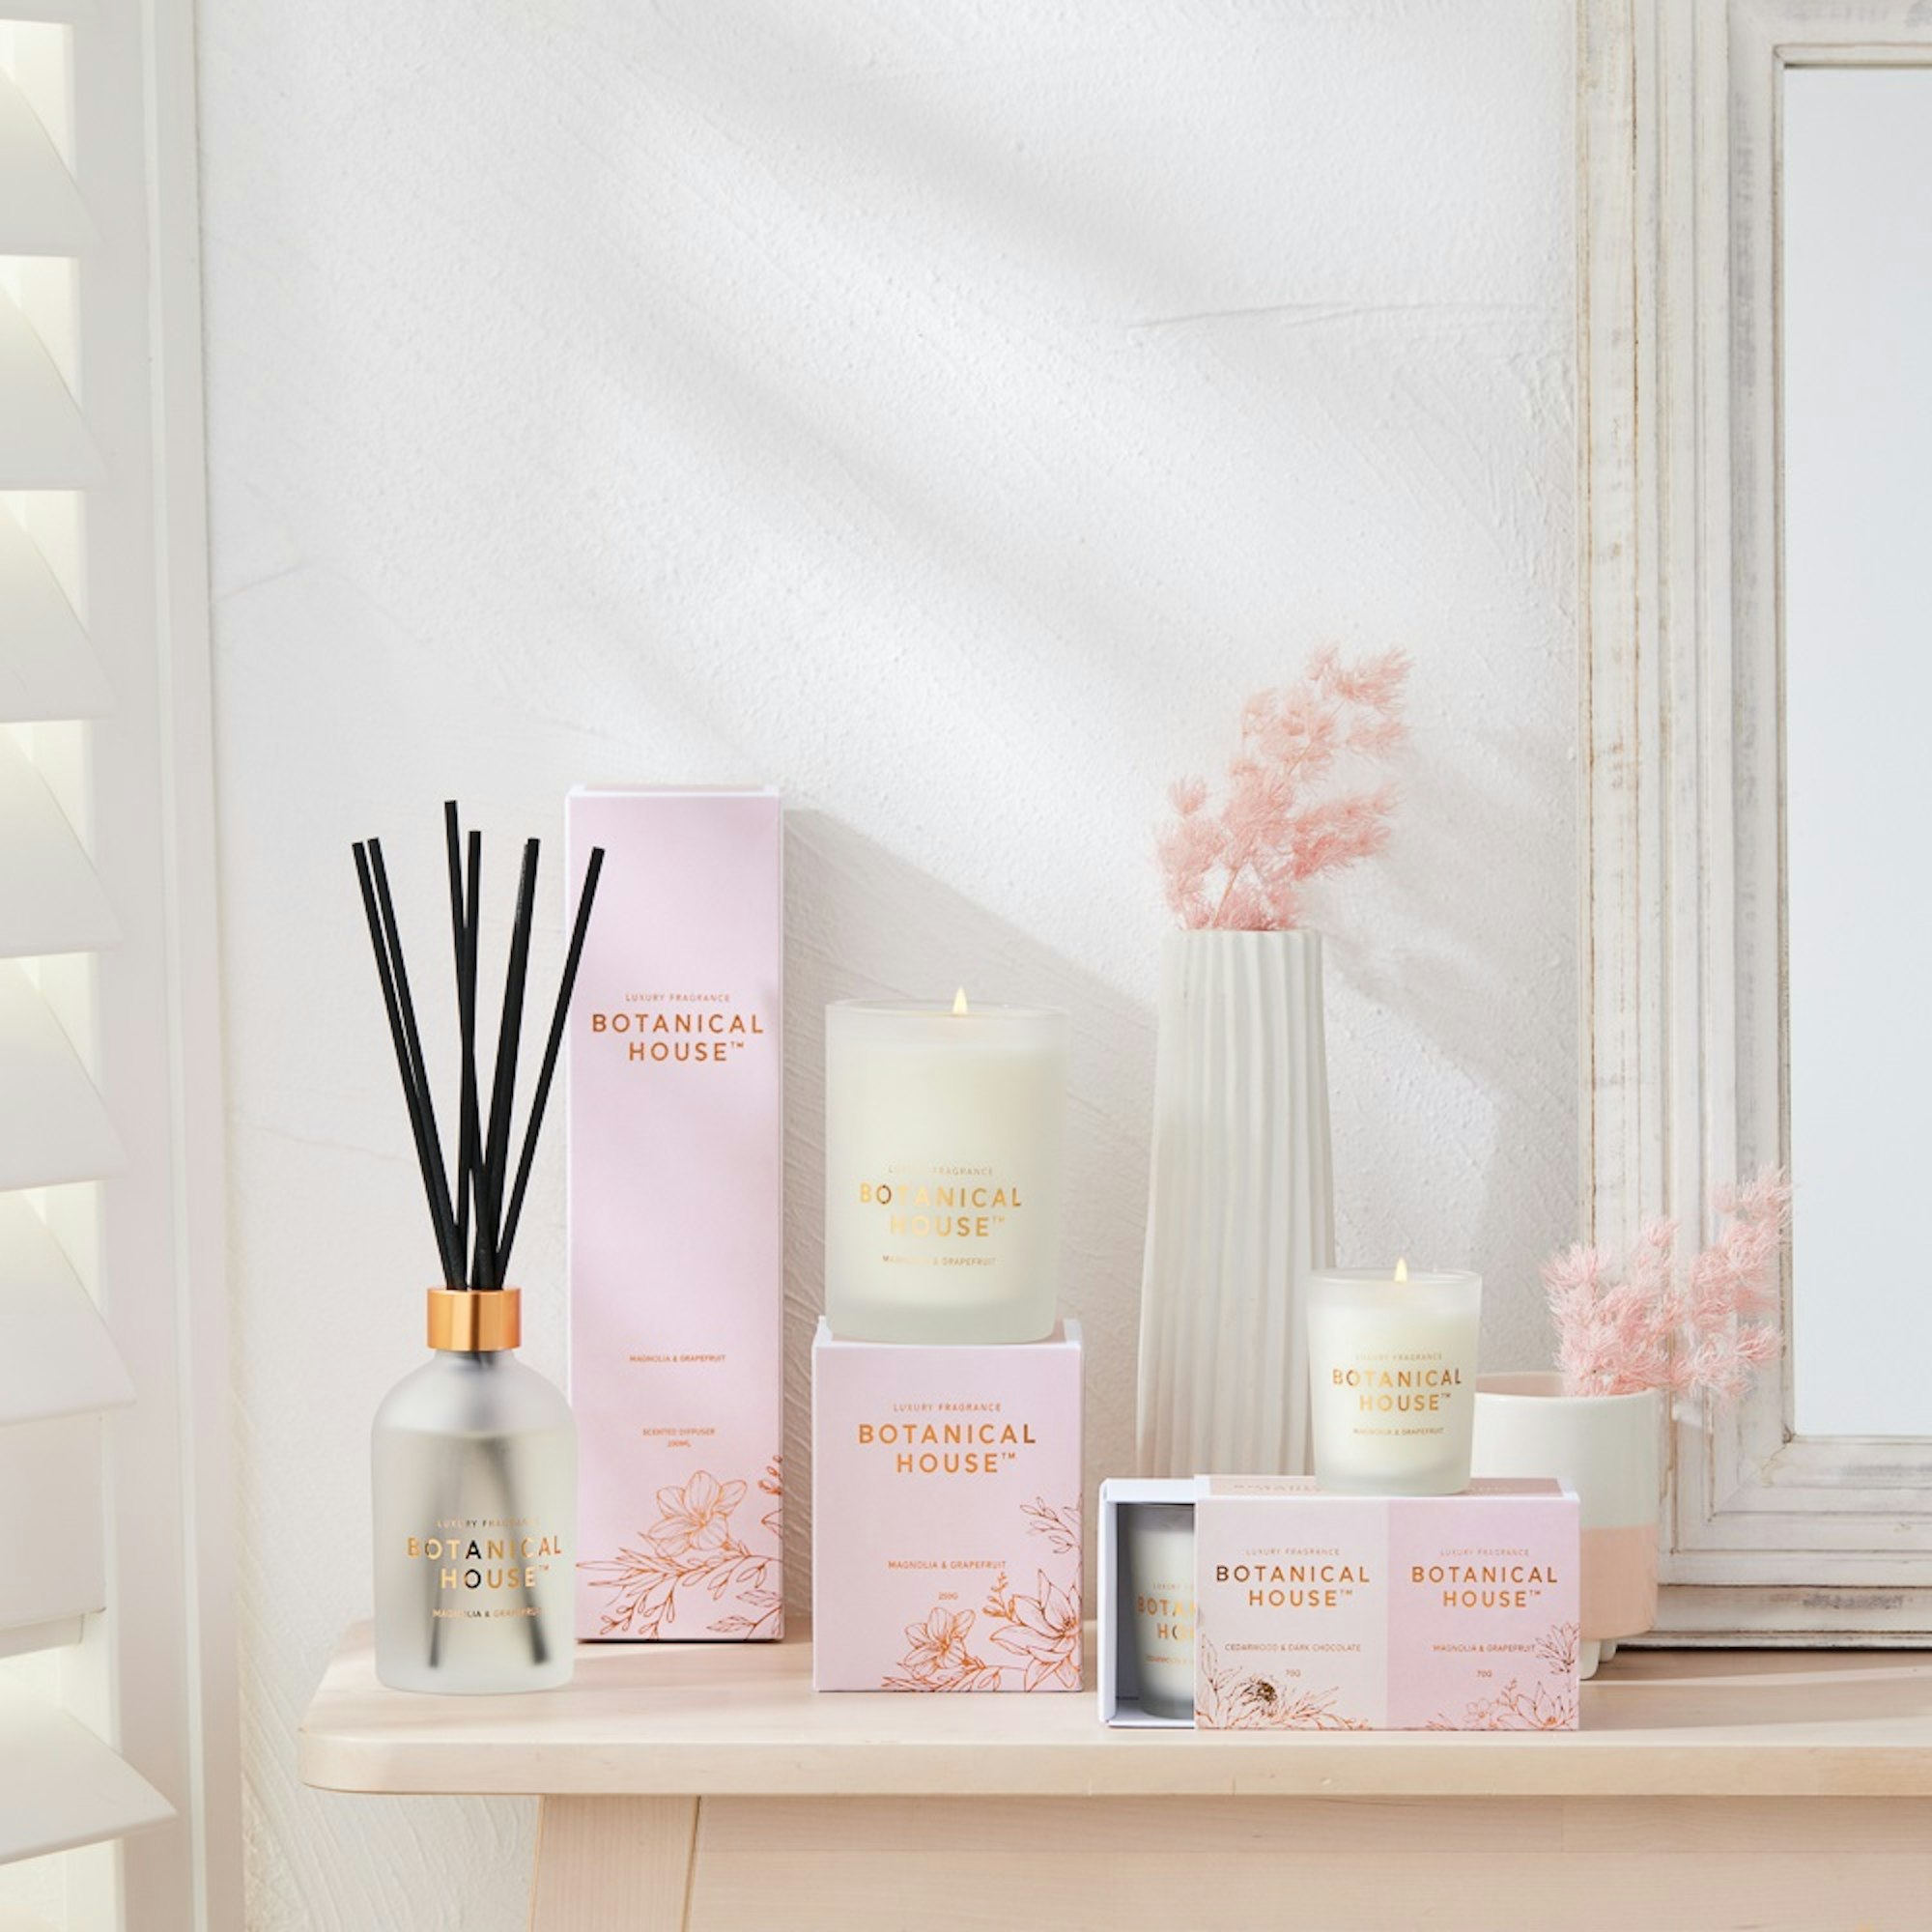 Botanical House Home Fragrance Collection. Scented candle and reed diffuser with pink packaging.